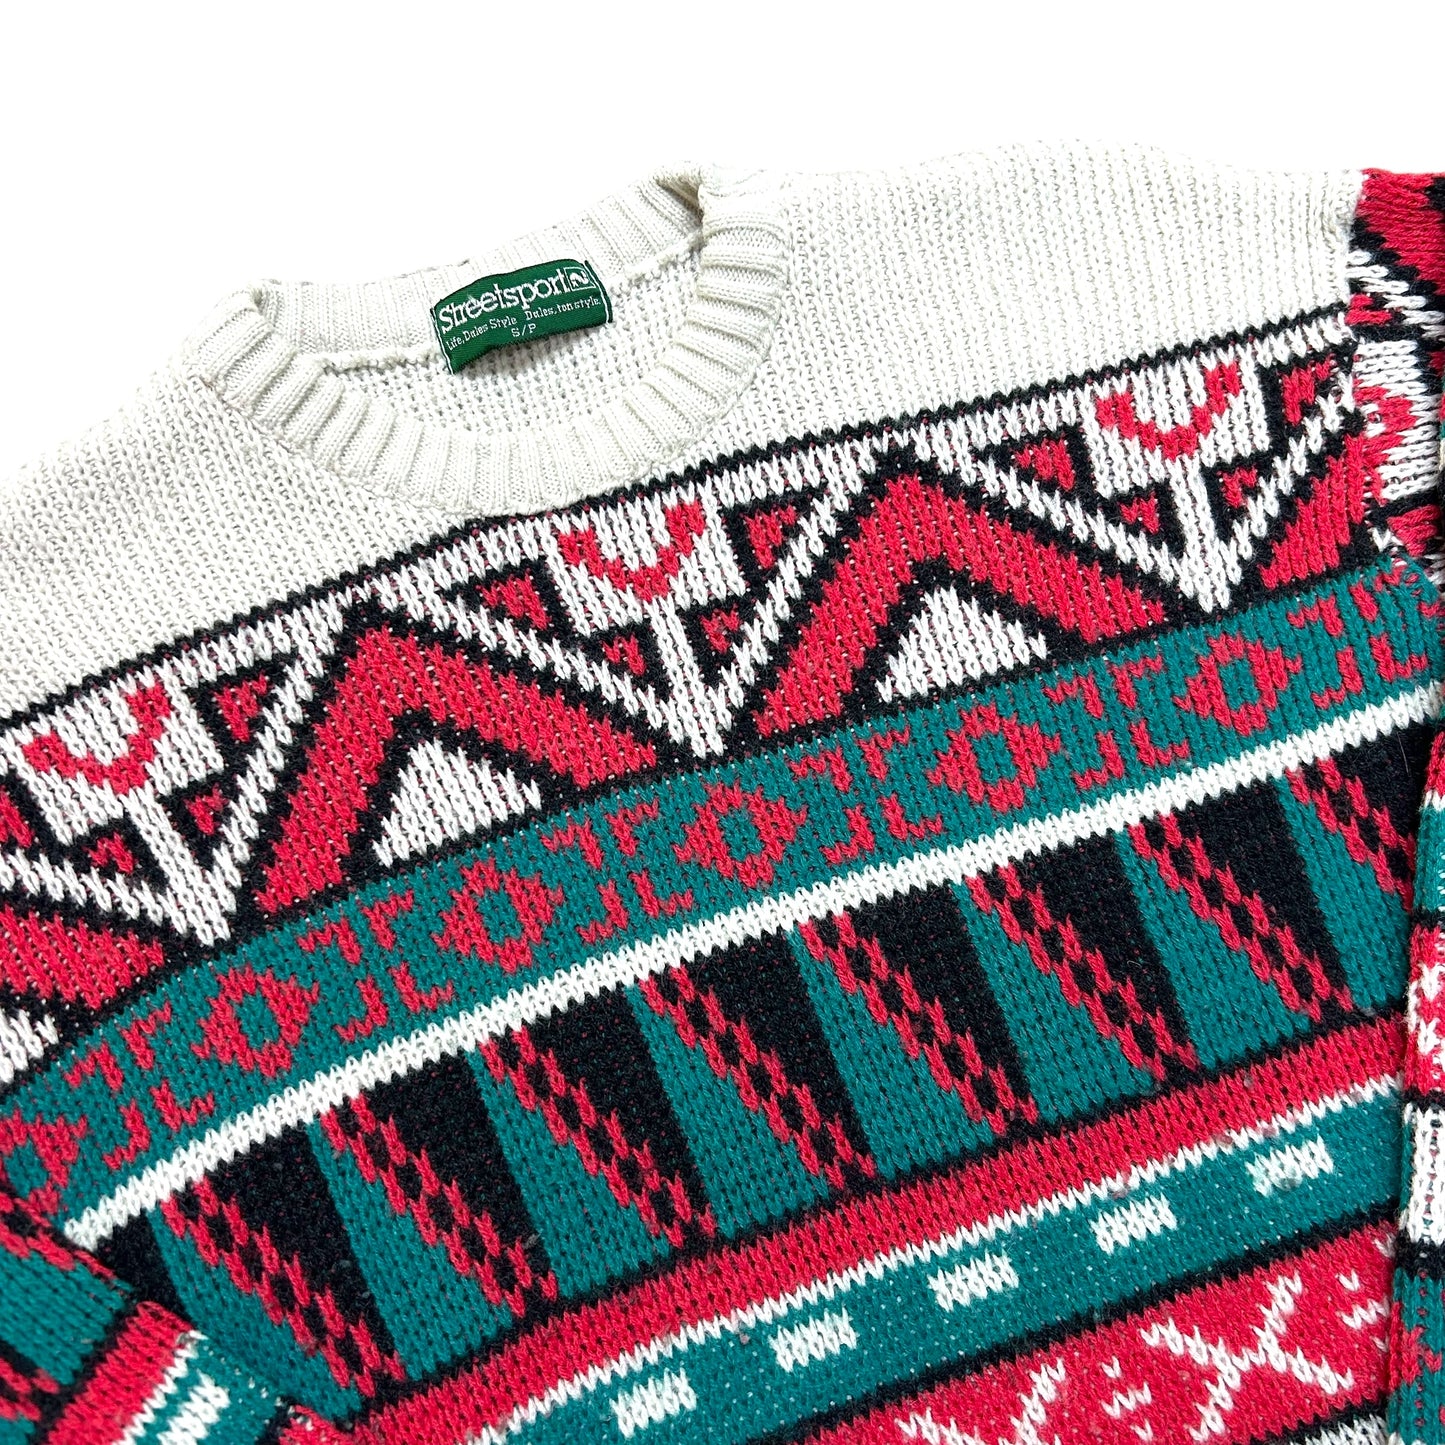 Vintage 1990s “Streetsport” White/Green/Red Geometric Pattern Knit Sweater - Size Small